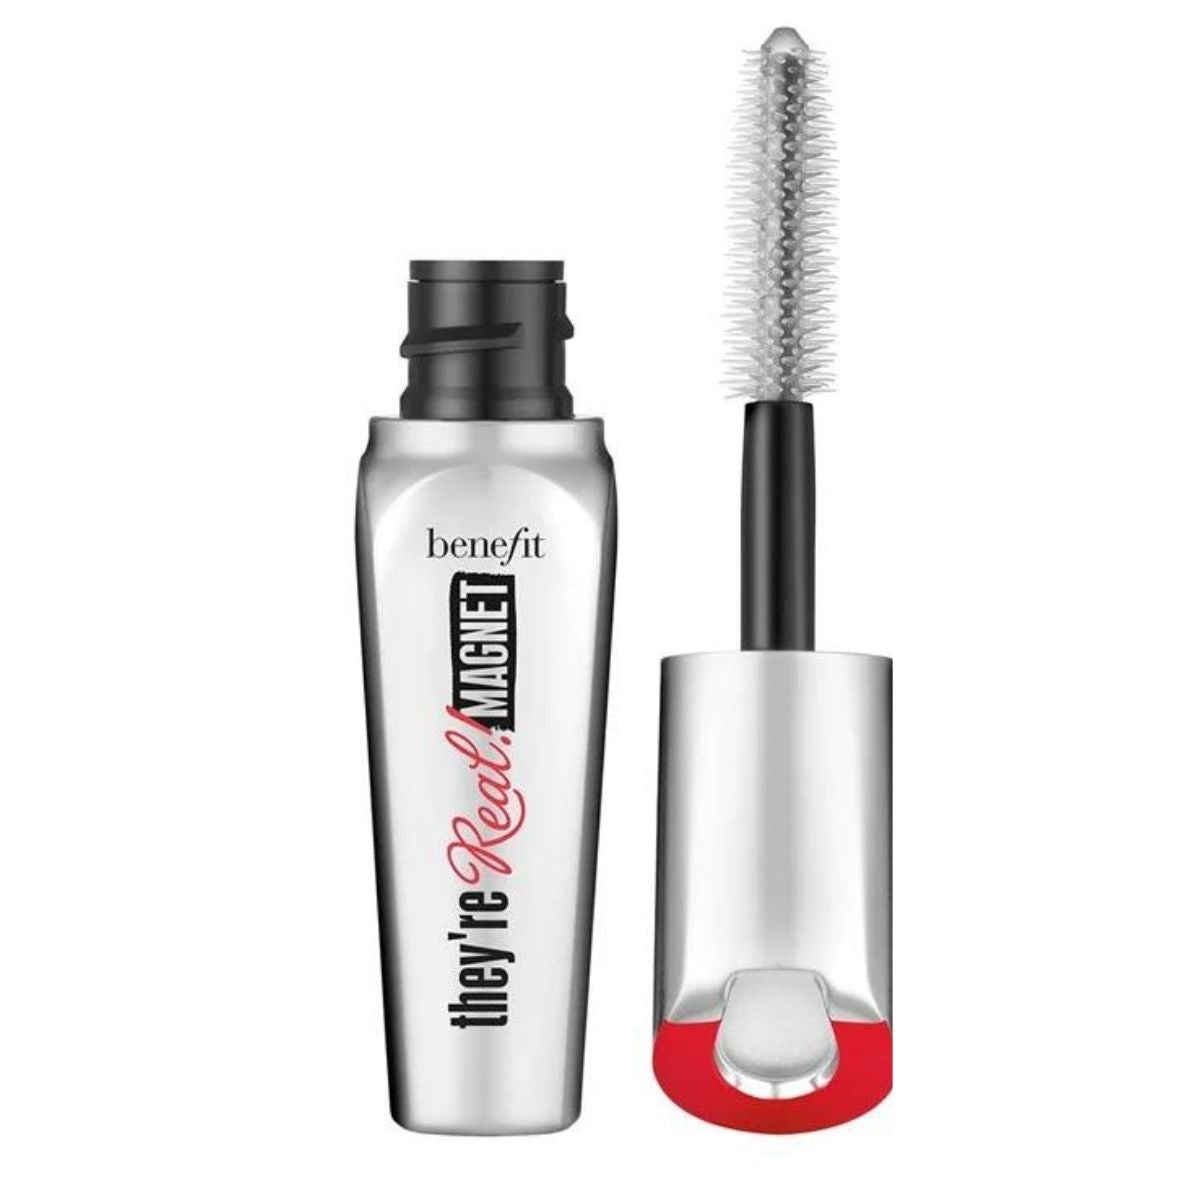 Benefit They're Real Magnet Black Mascara Mini